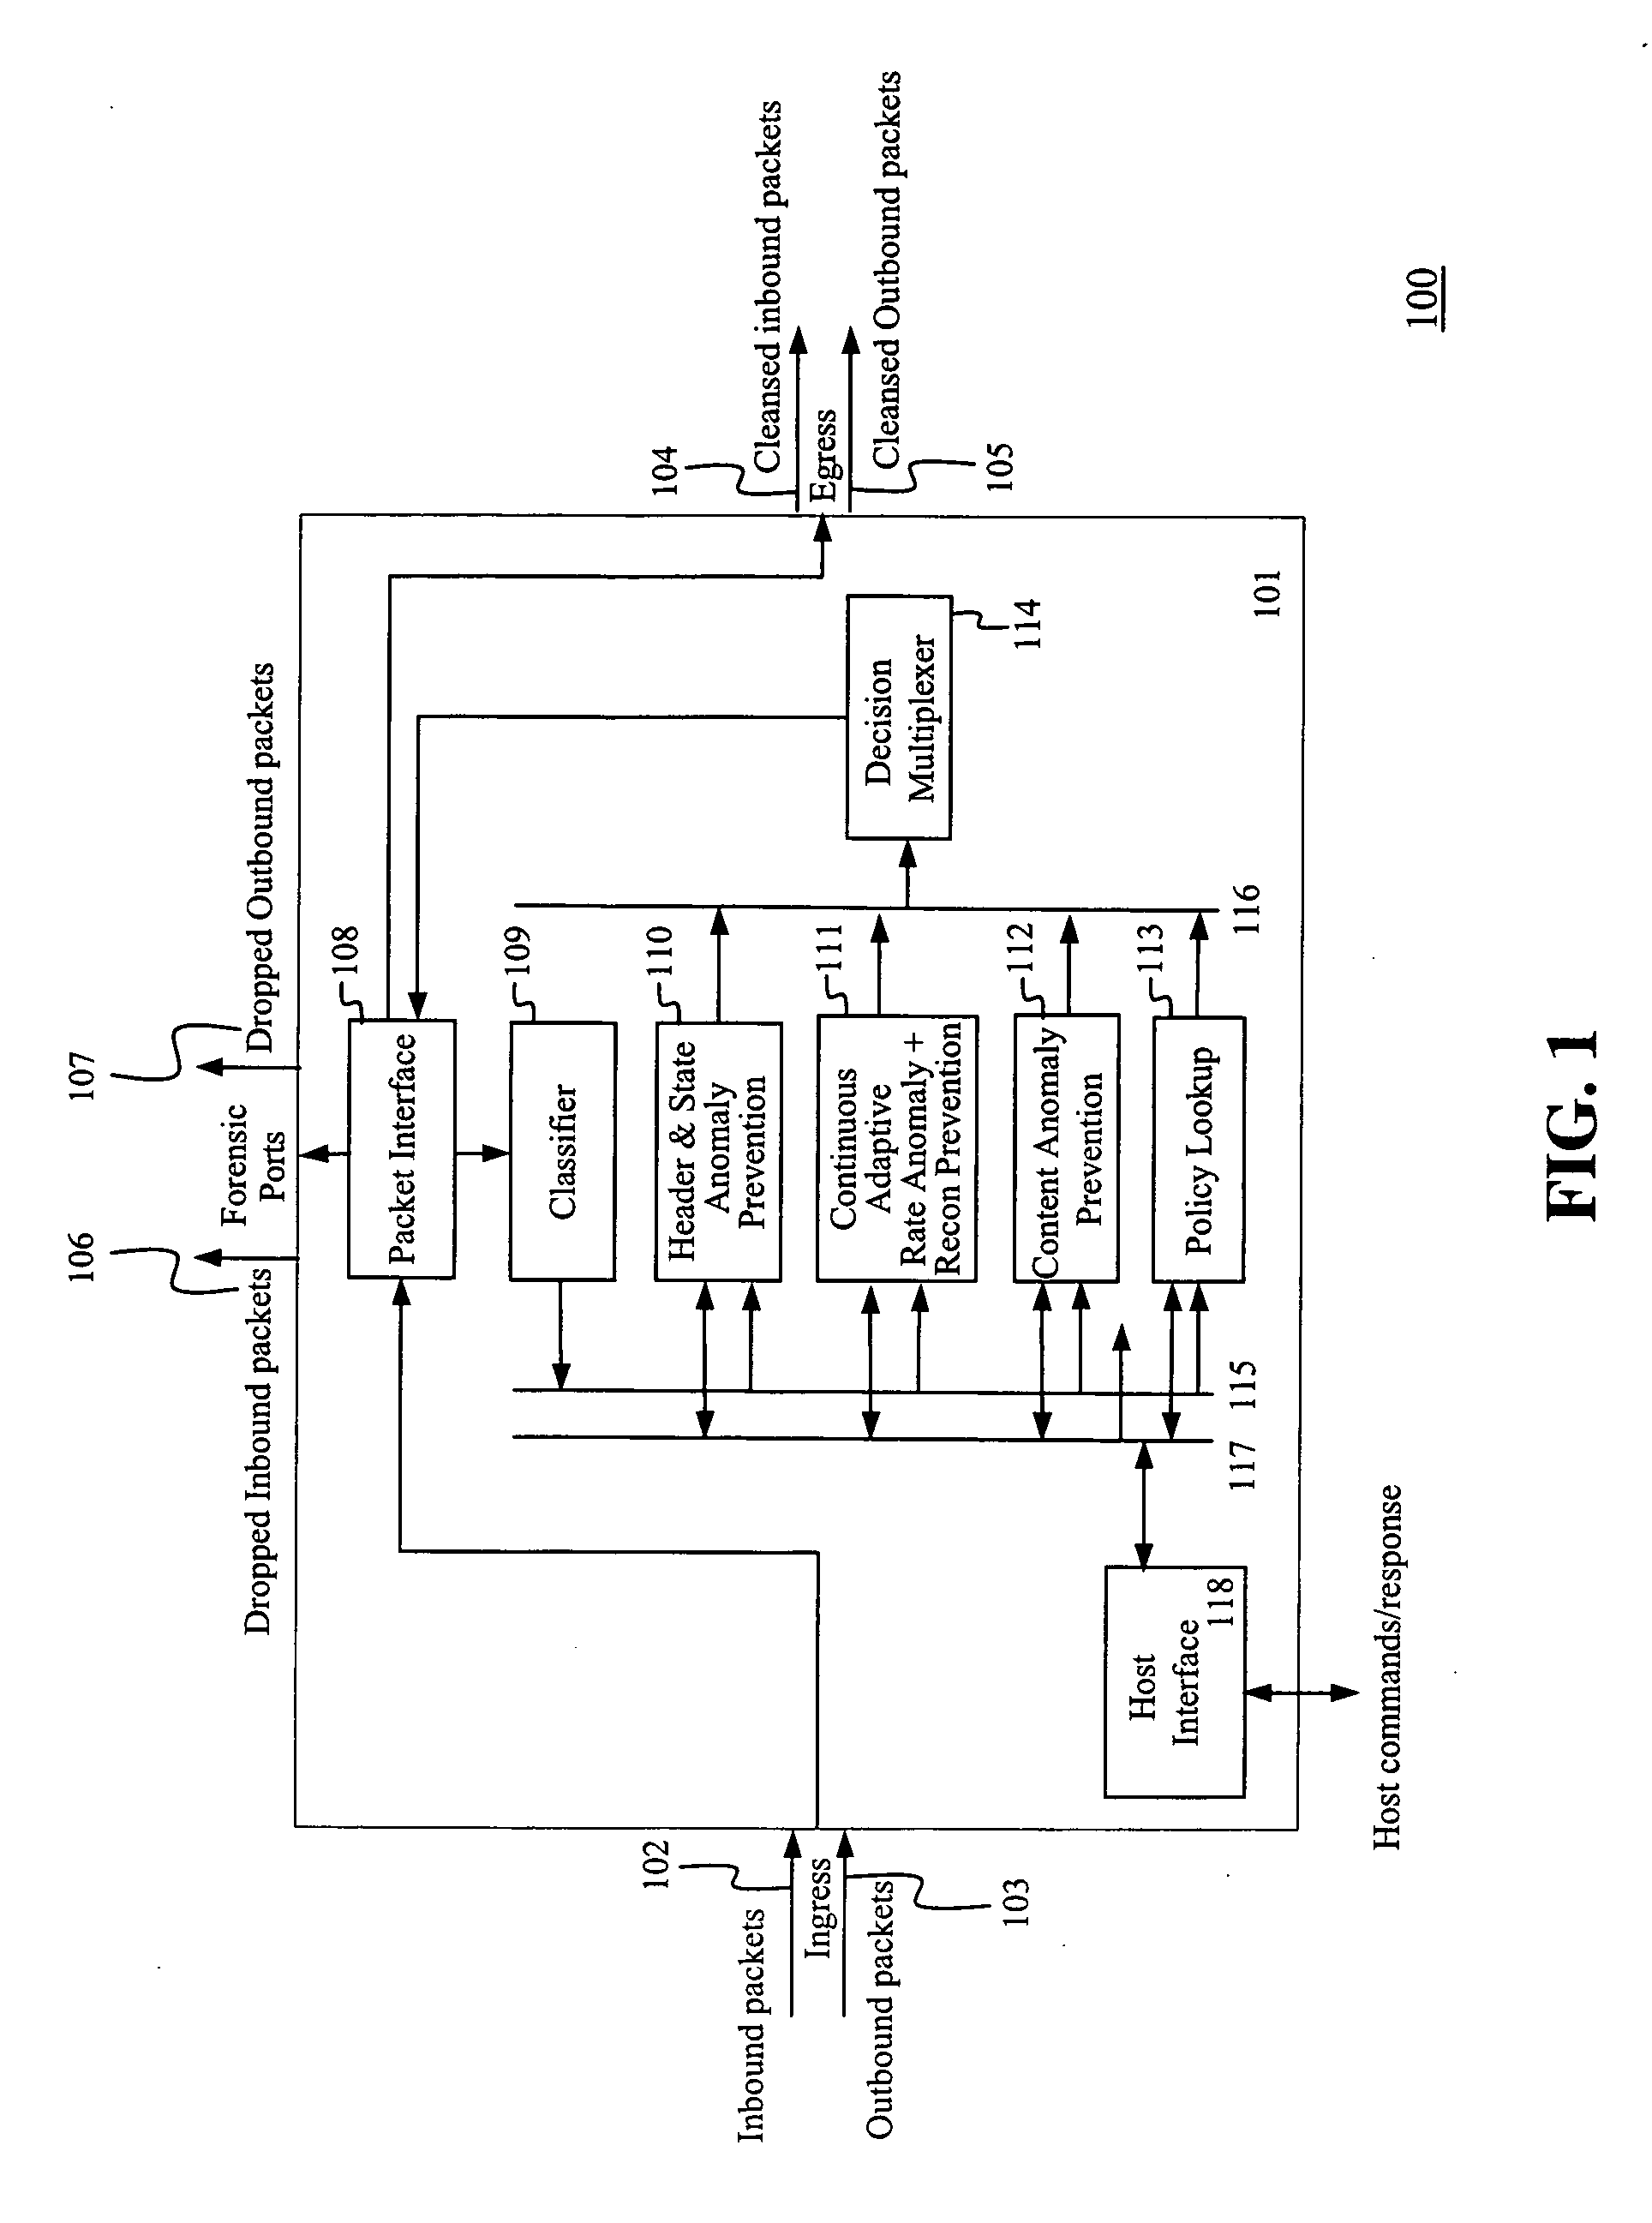 System and method for integrated header, state, rate and content anomaly prevention for domain name service